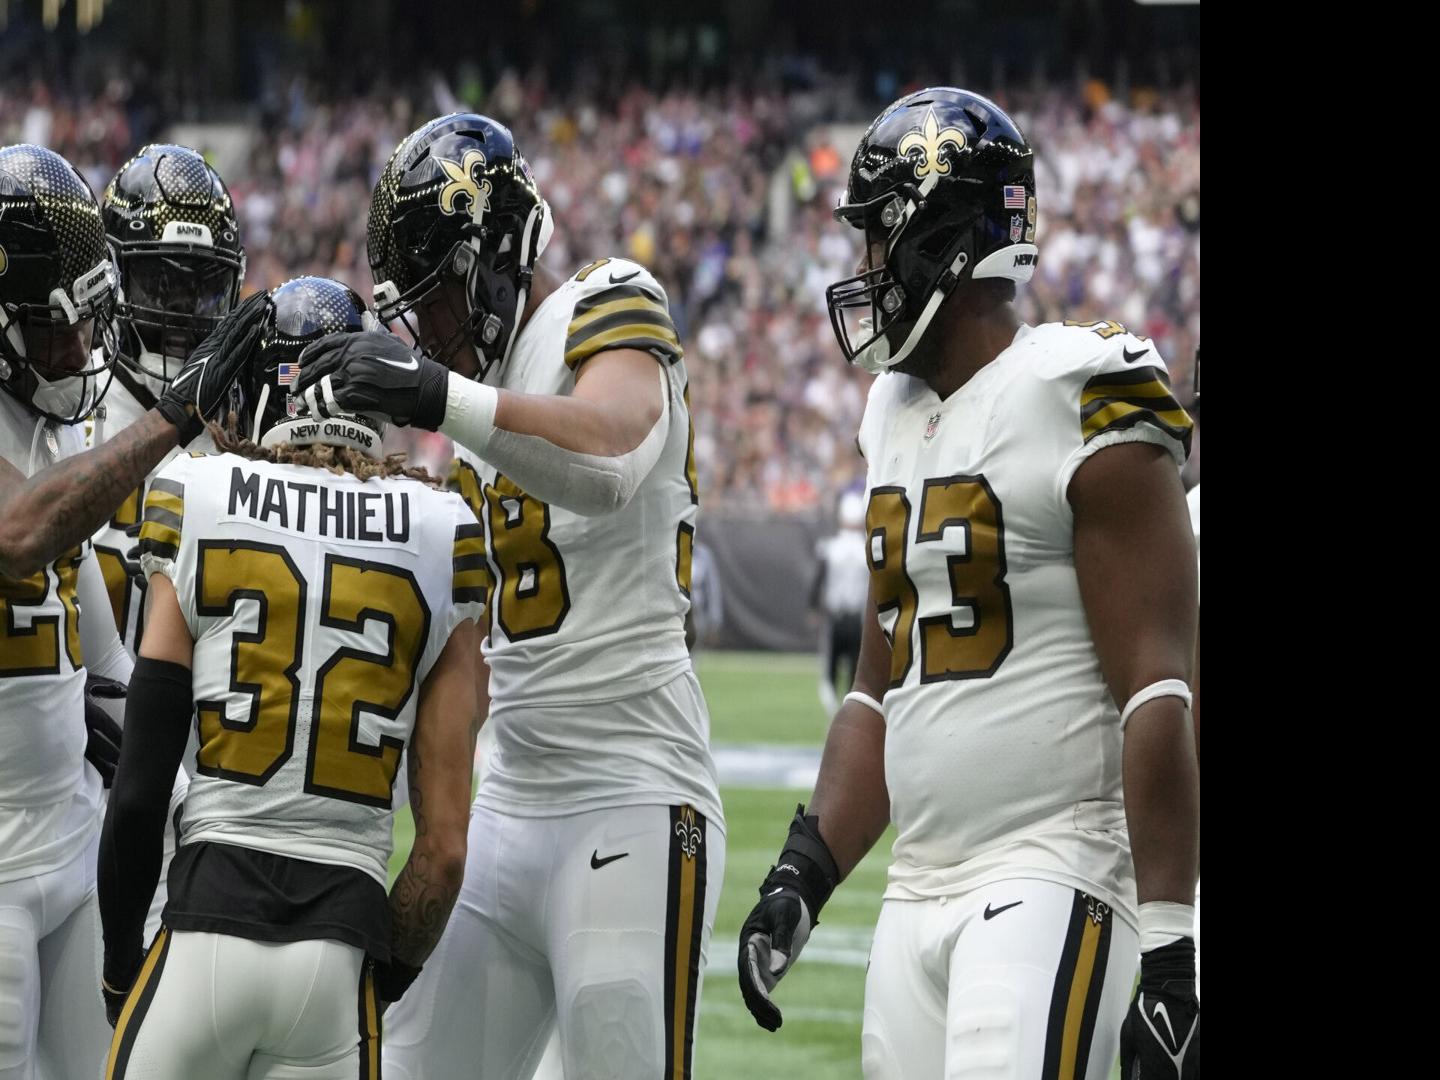 New Orleans Saints uniforms ranked sixth-best among the entire NFL